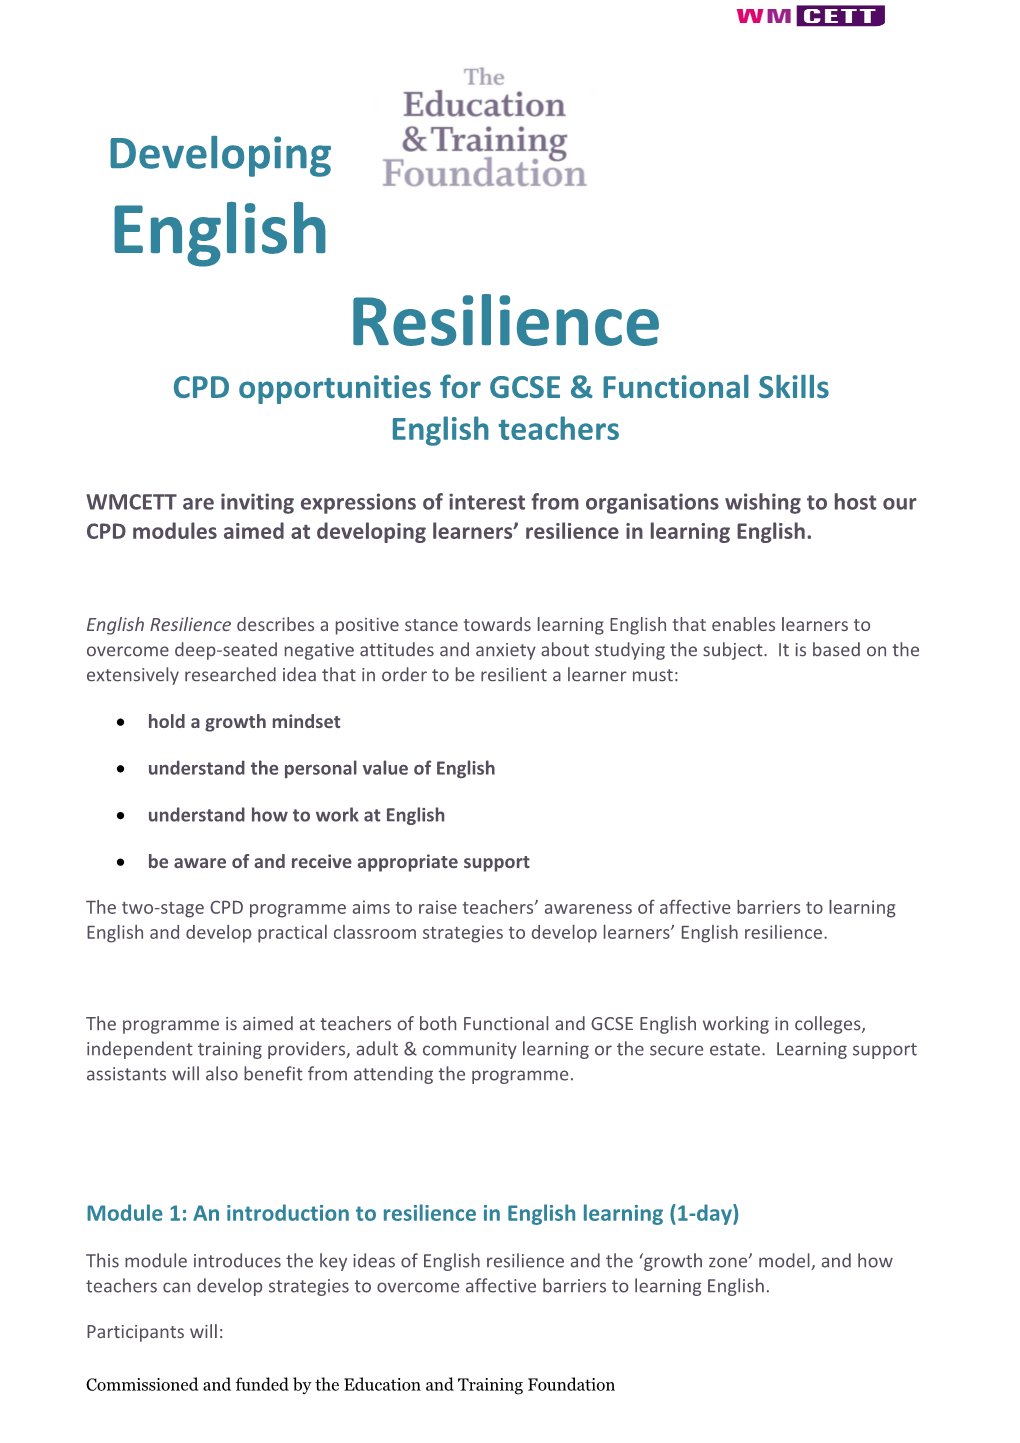 CPD Opportunities for GCSE & Functional Skills